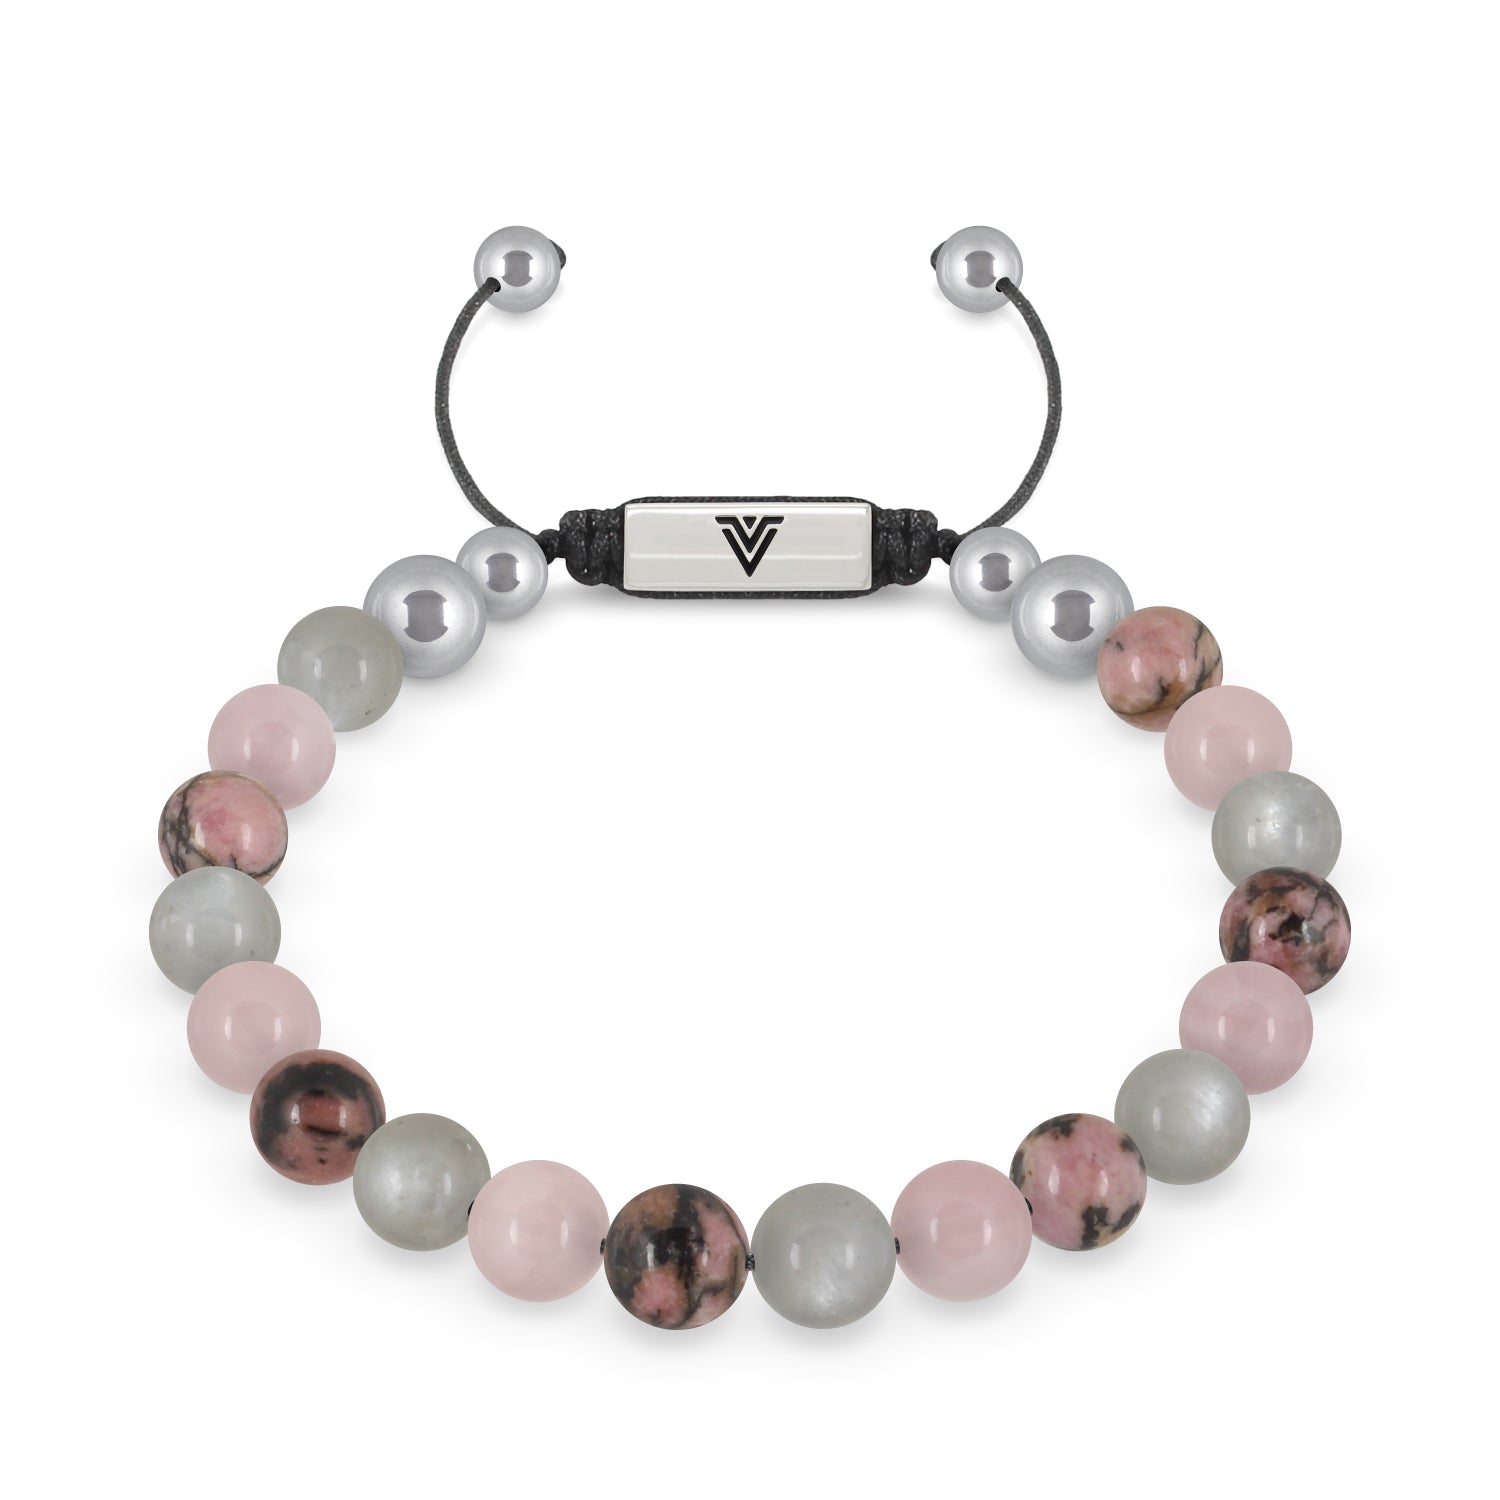 Front view of an 8mm Cancer Zodiac beaded shamballa bracelet featuring Moonstone, Rose Quartz, & Rhodonite crystal and silver stainless steel logo bead made by Voltlin